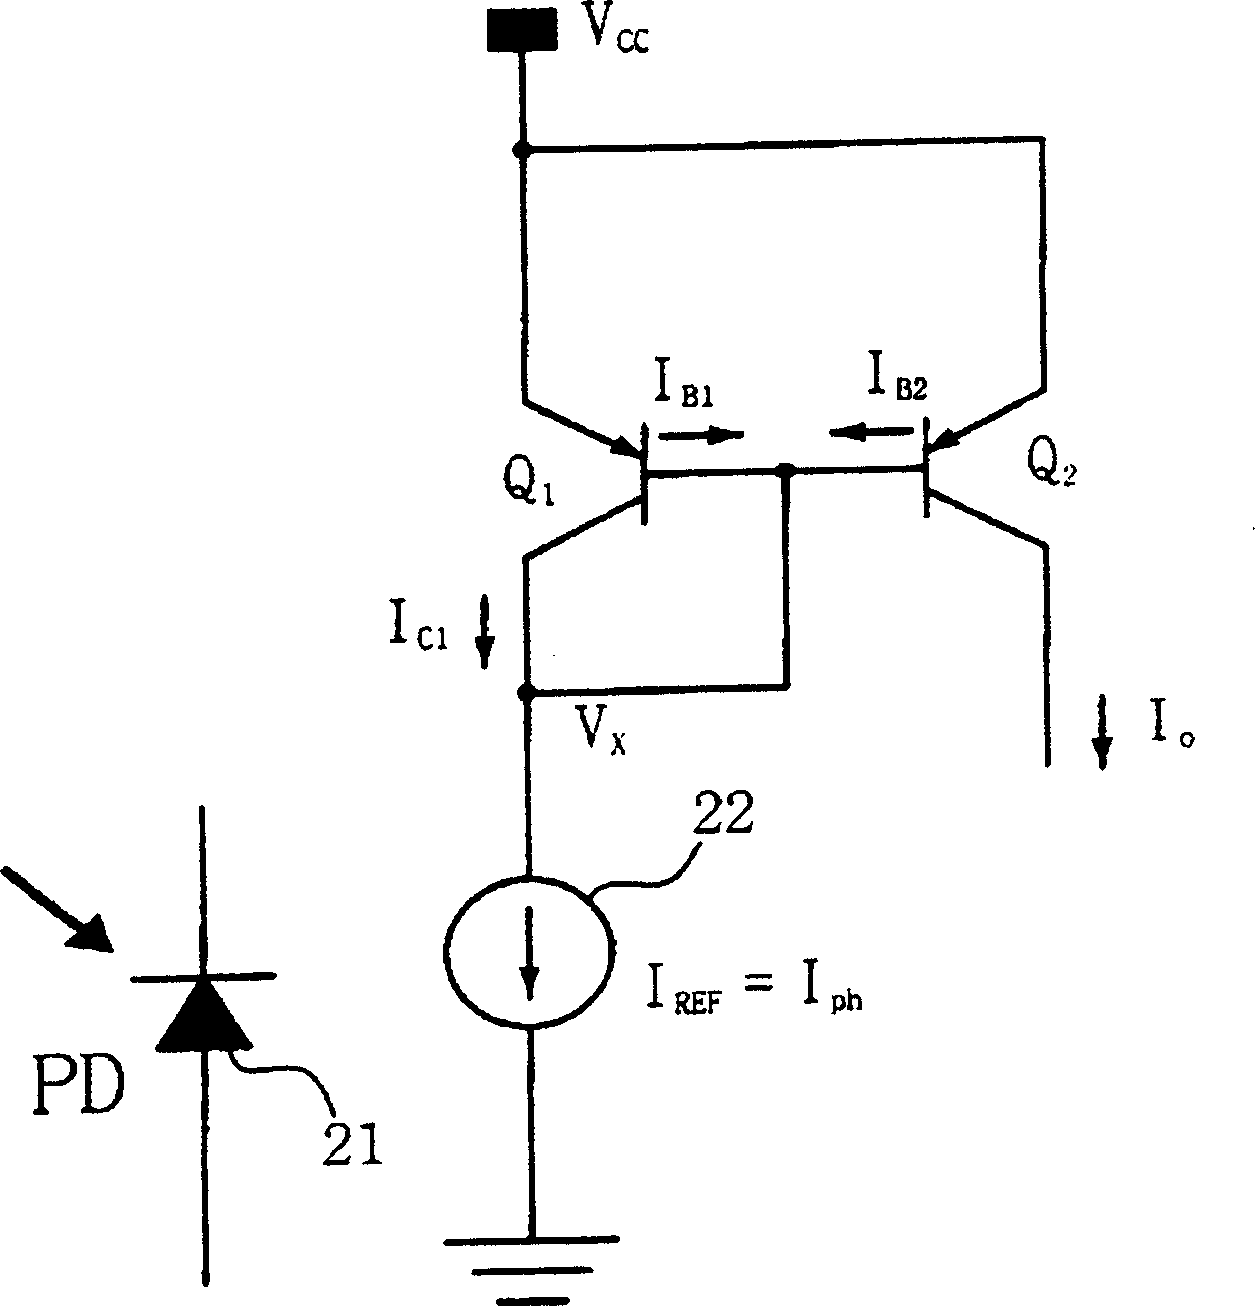 Current to voltage conversion circuit for photo detector integrated circuit employing gain switching circuit